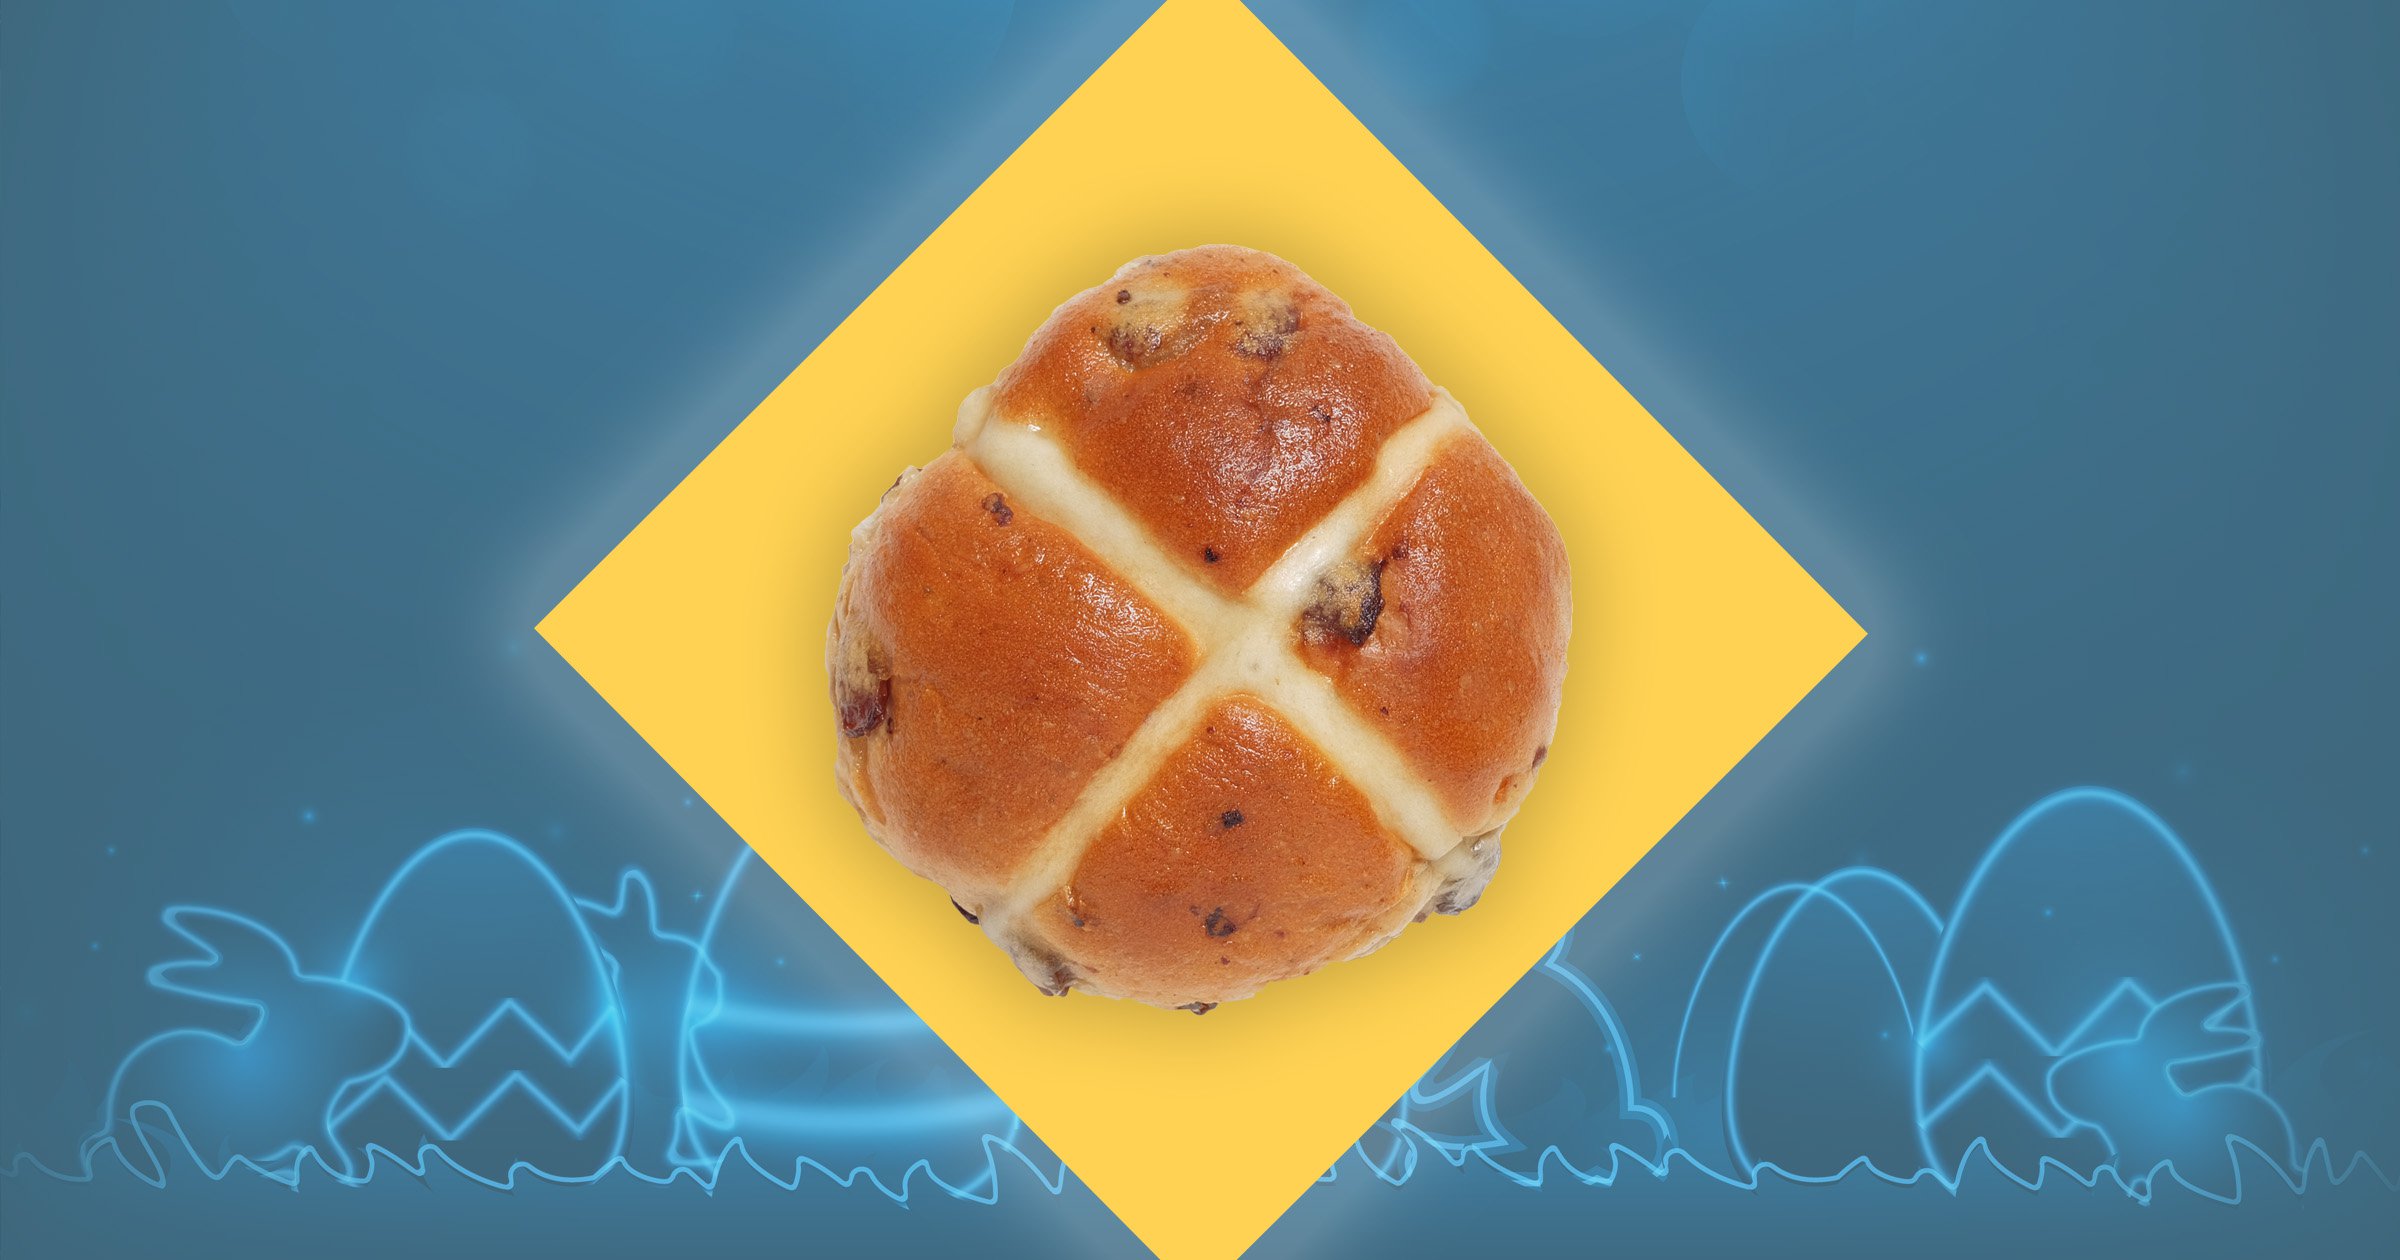 Sorry hot cross bun fans, Greggs is ditching the Easter treat from its menu